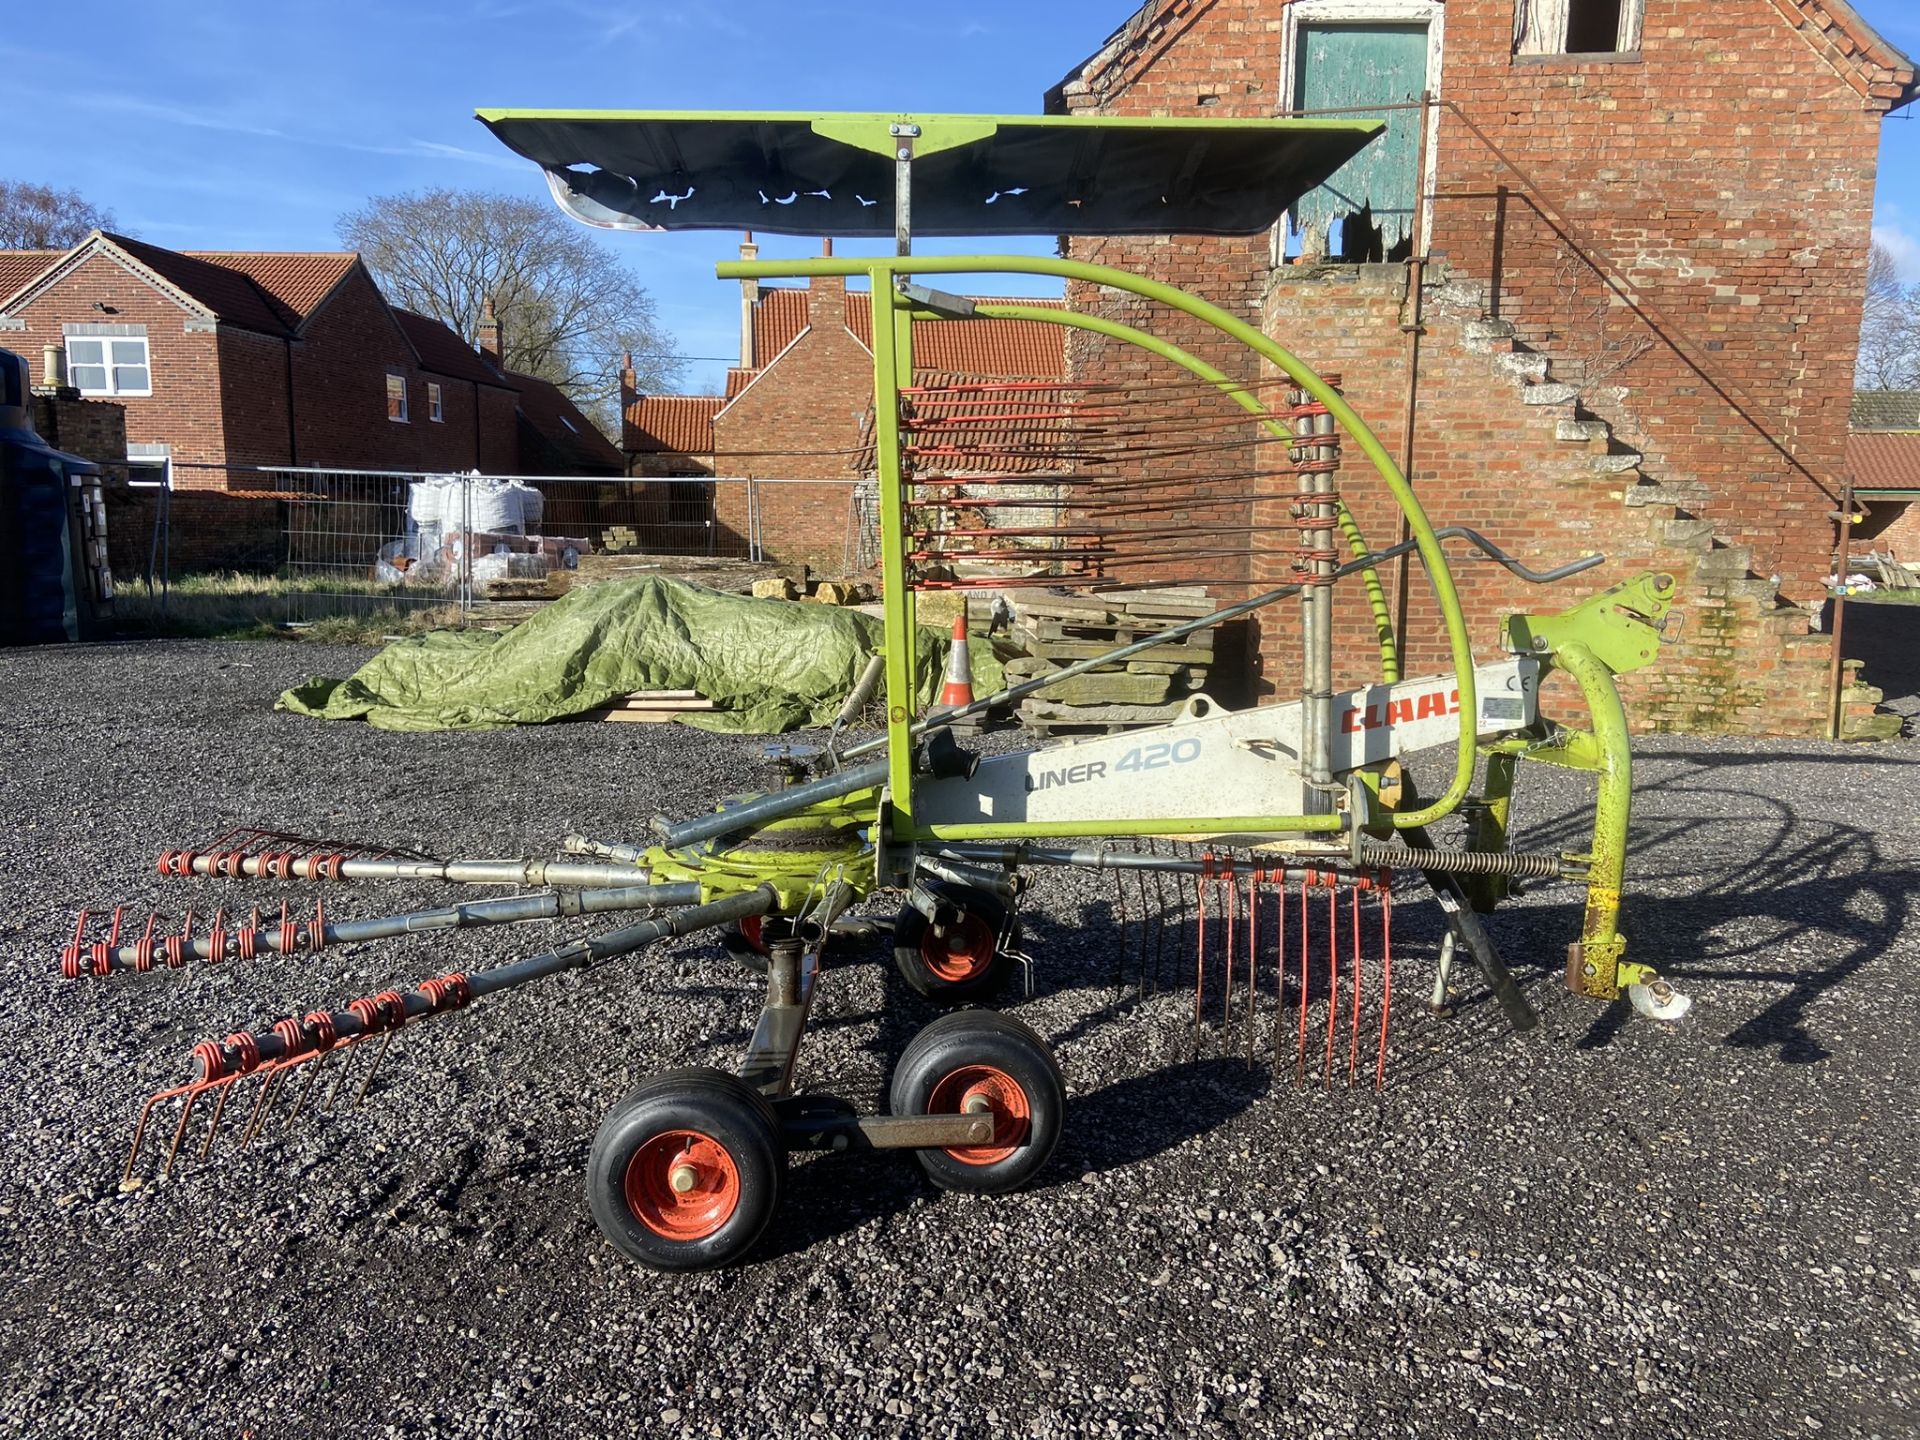 2013 Claas Liner 420 Type G11 Single Rotor Rake, S/No. G1101894, Mass Weight 650kg, 12 Tine Arms, - Image 2 of 5